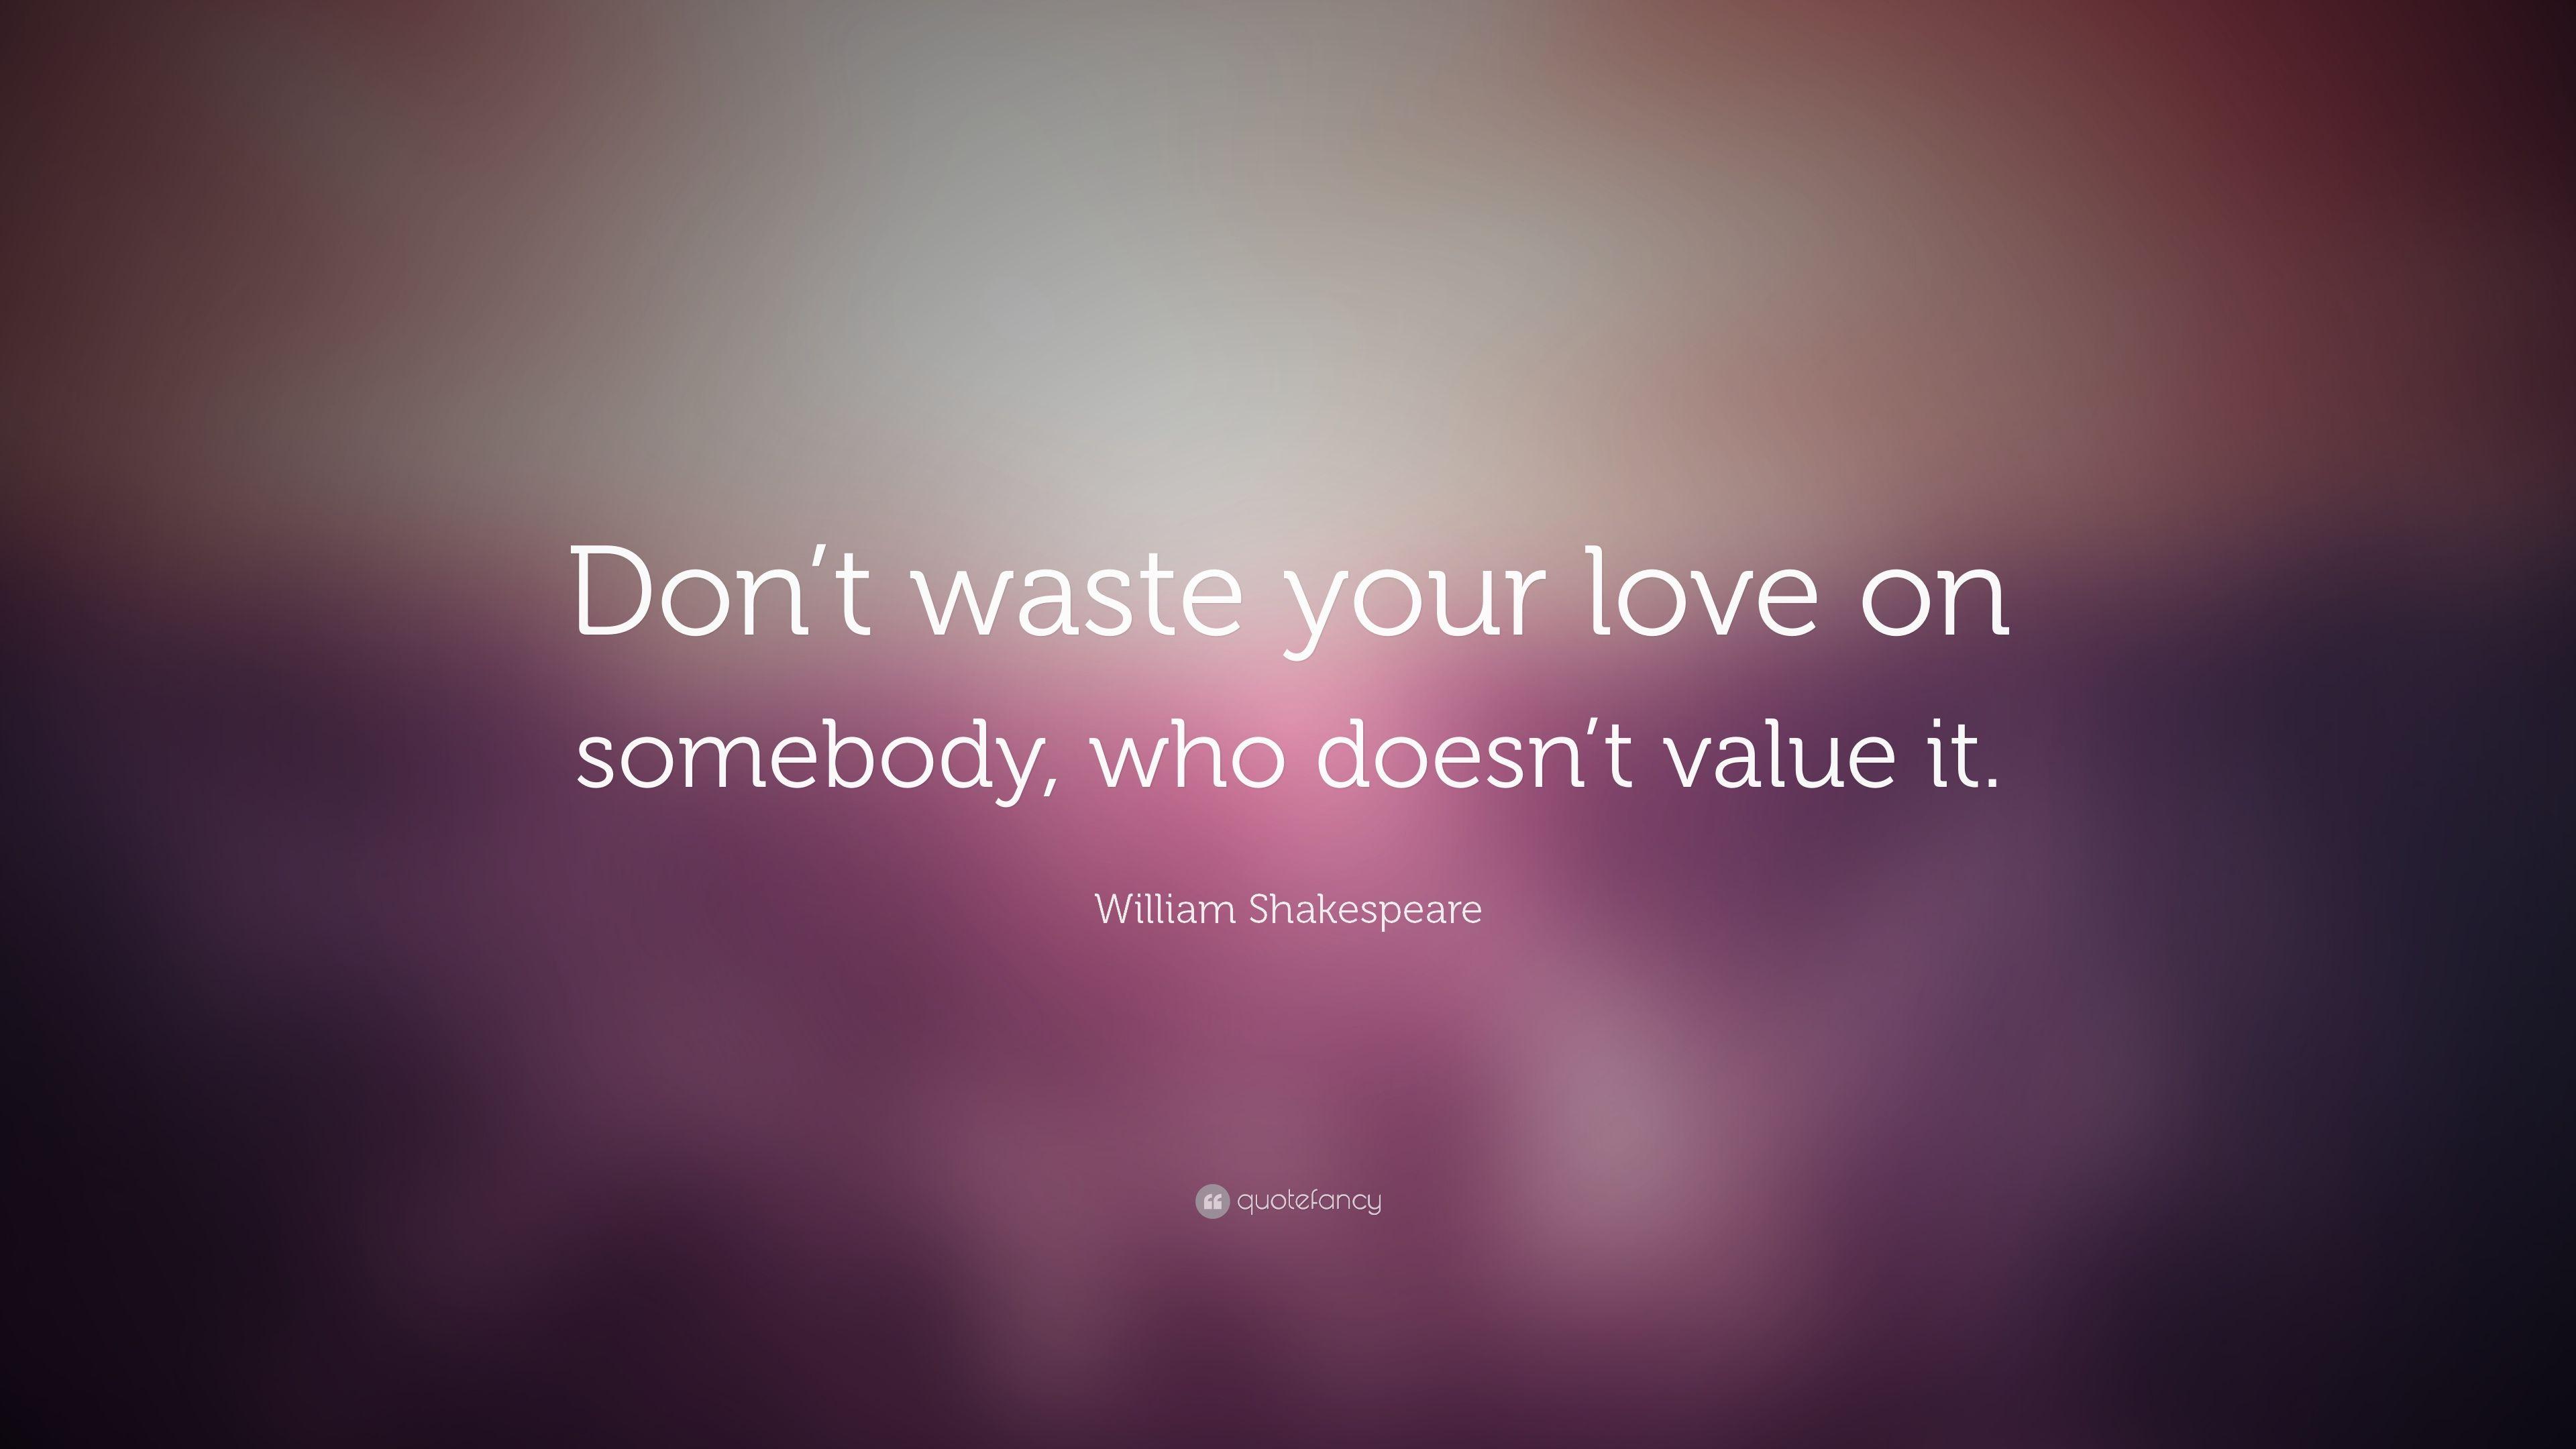 William Shakespeare Quote: “Don't waste your love on somebody, who